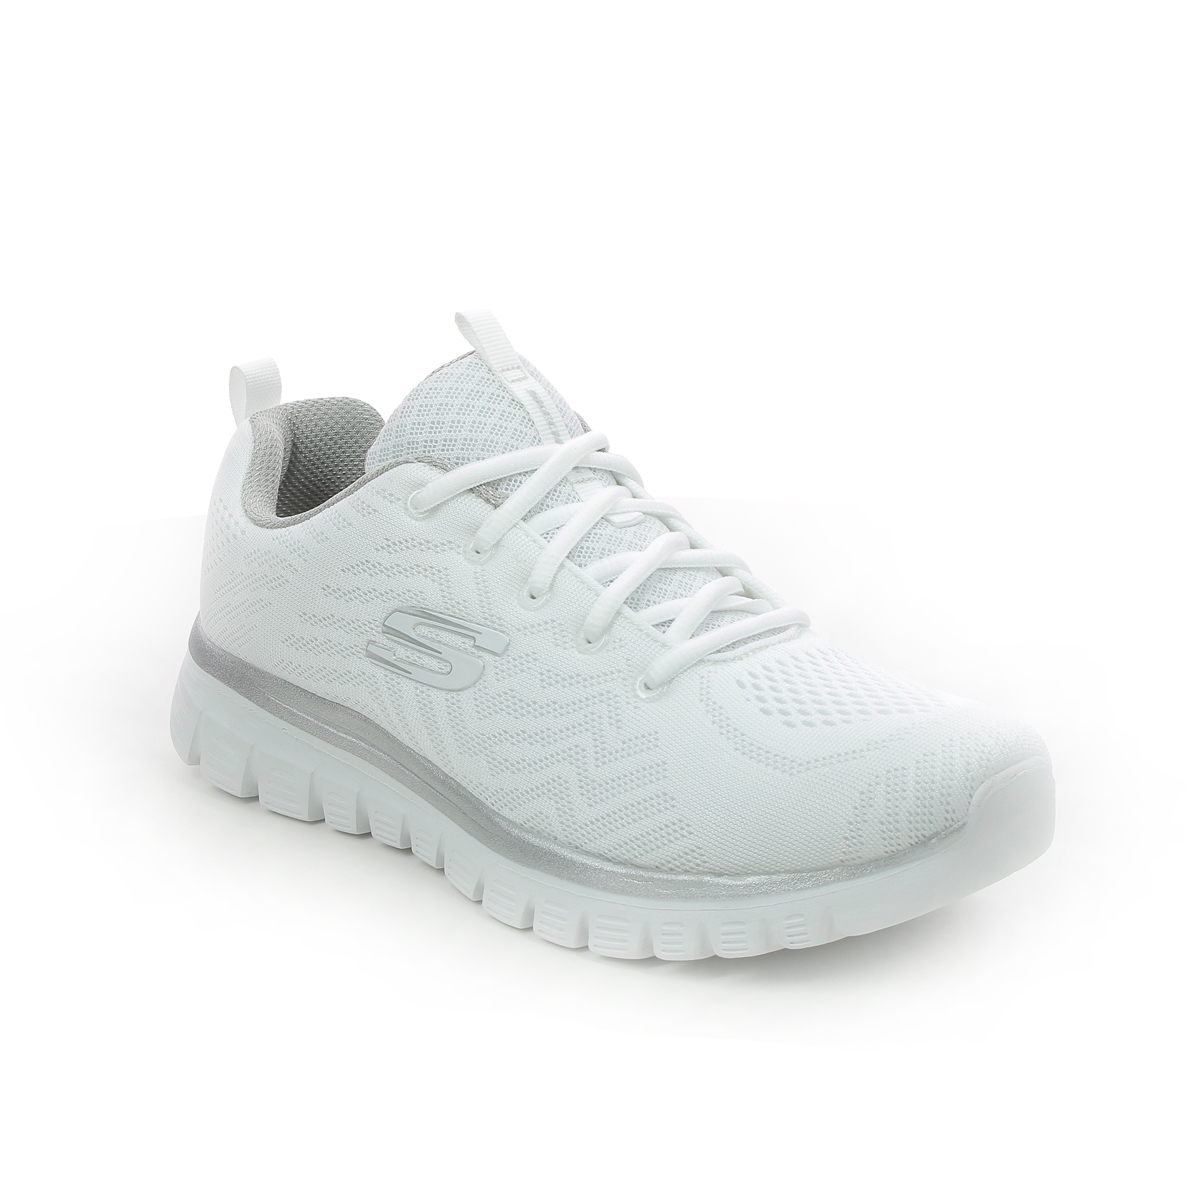 Skechers Get Connected White-Silver Womens Trainers 12615 In Size 5 In Plain White-Silver